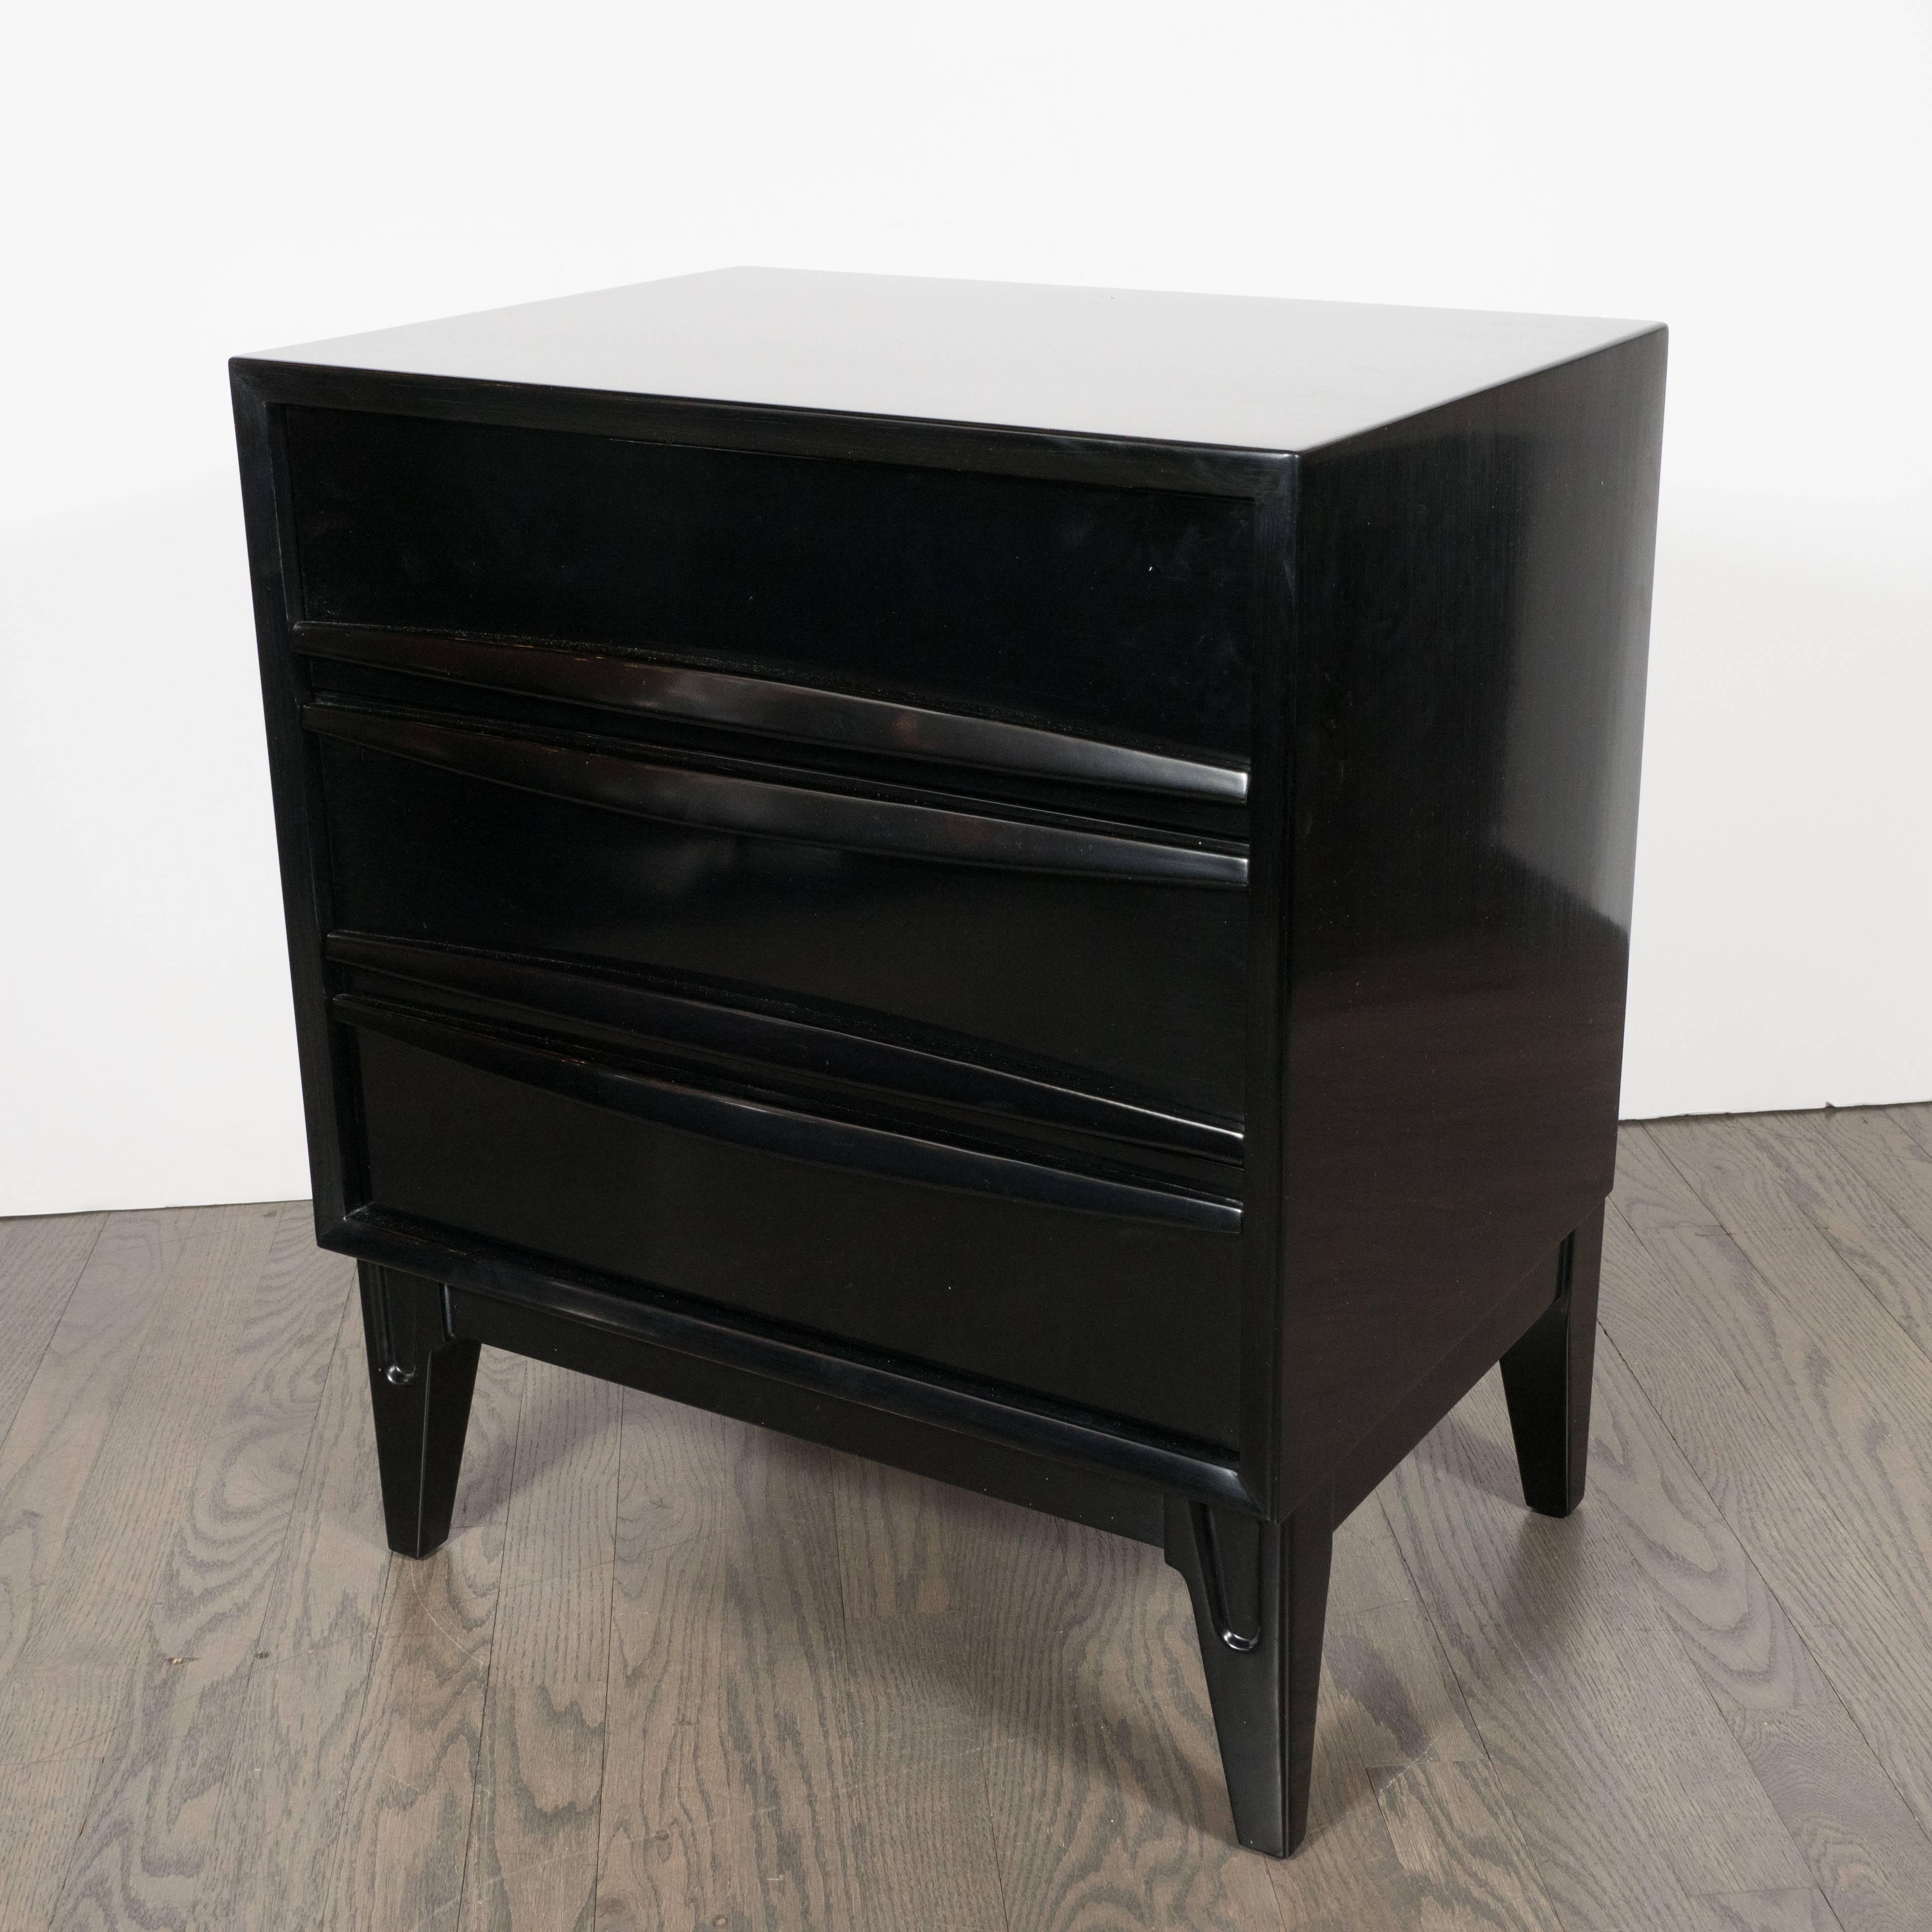 This elegant pair of nightstands were realized in the United States, circa 1960. Each features gently tapered legs, raised horizontal slat pulls that resemble two pairs of abstracted and stylized lips when closed, plus three commodious drawers